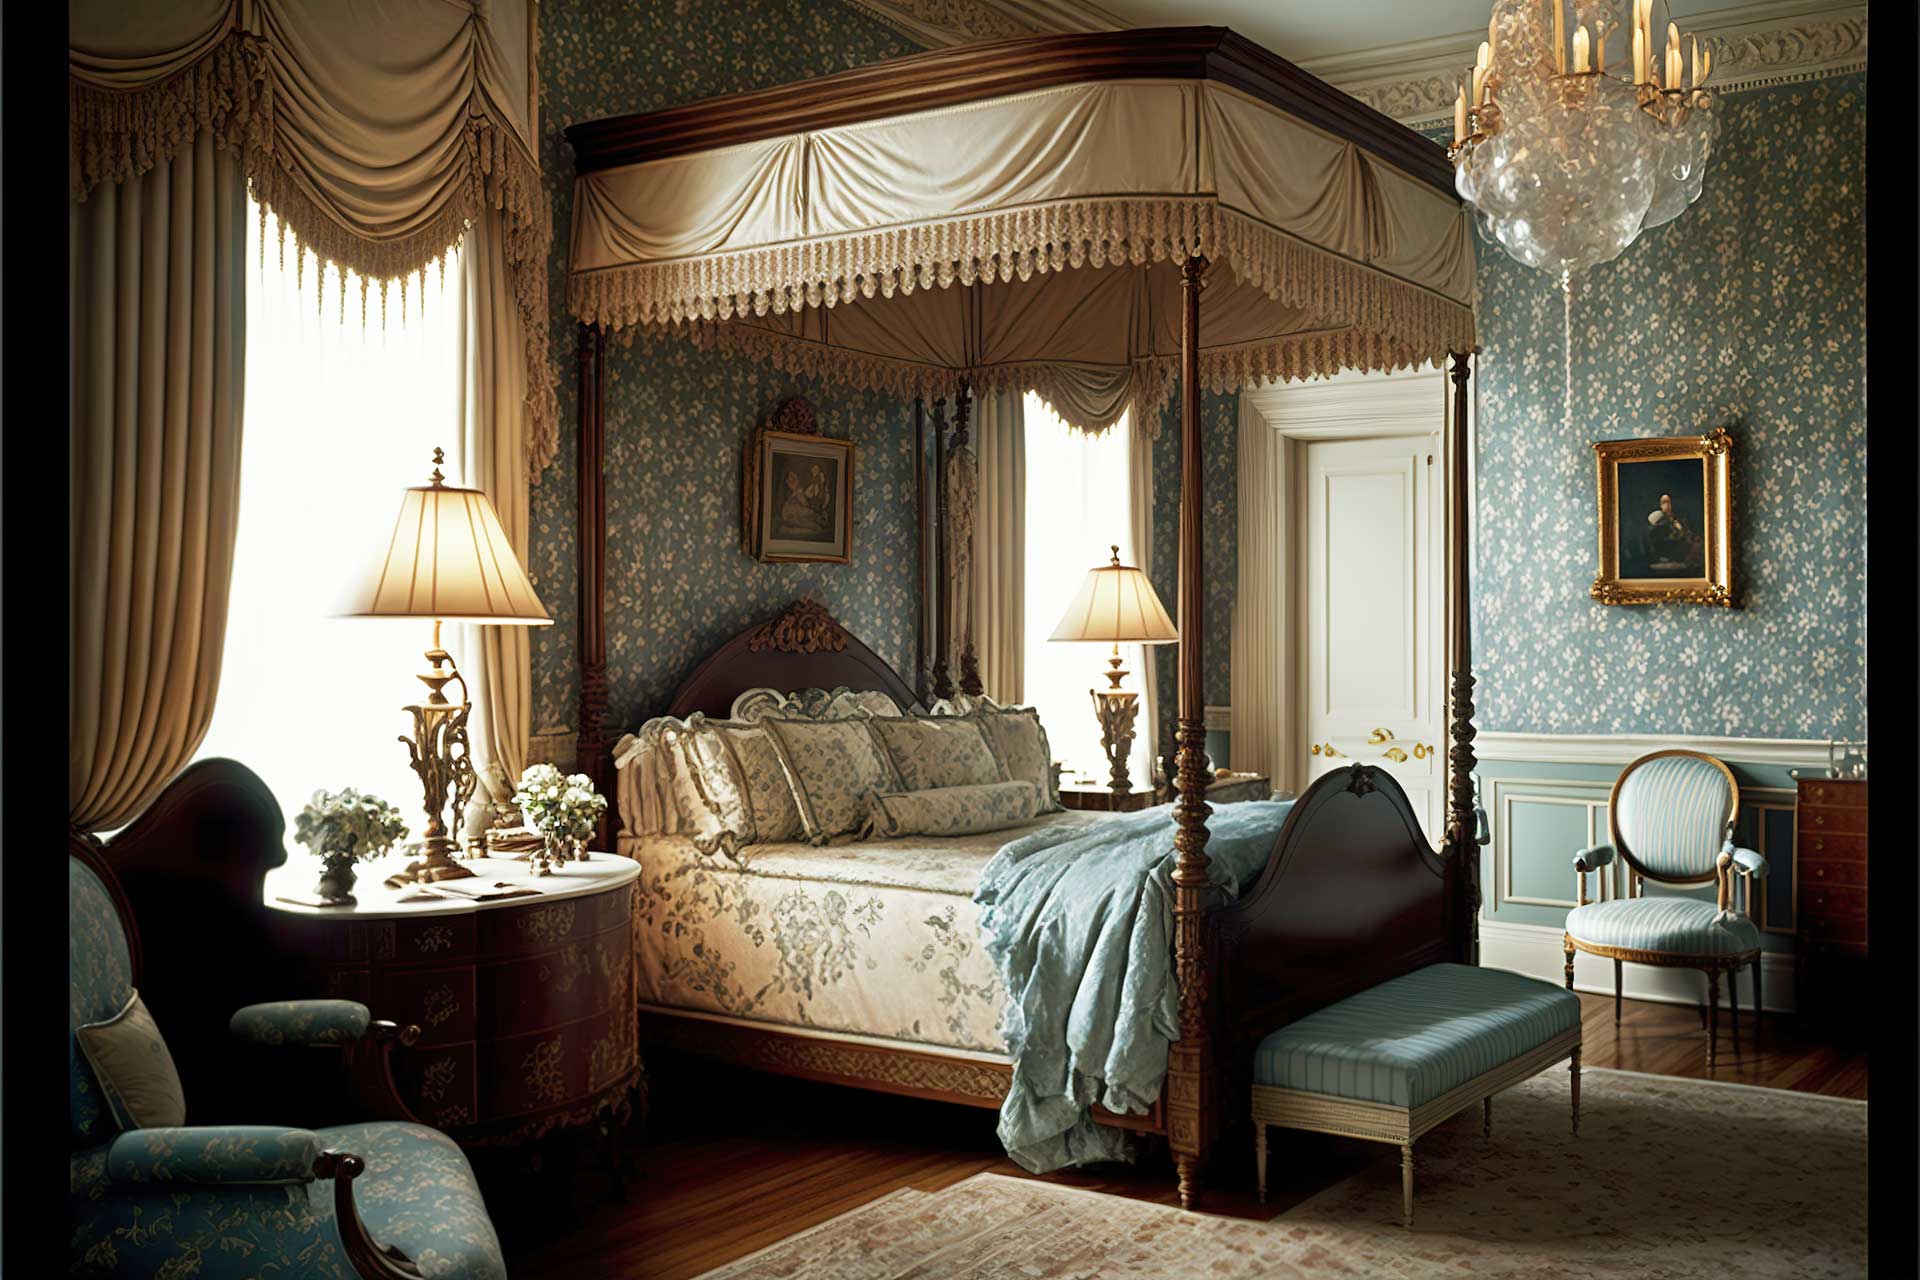 Elegant Antique Inspired Bedroom With Grand Armchair And Ottoman